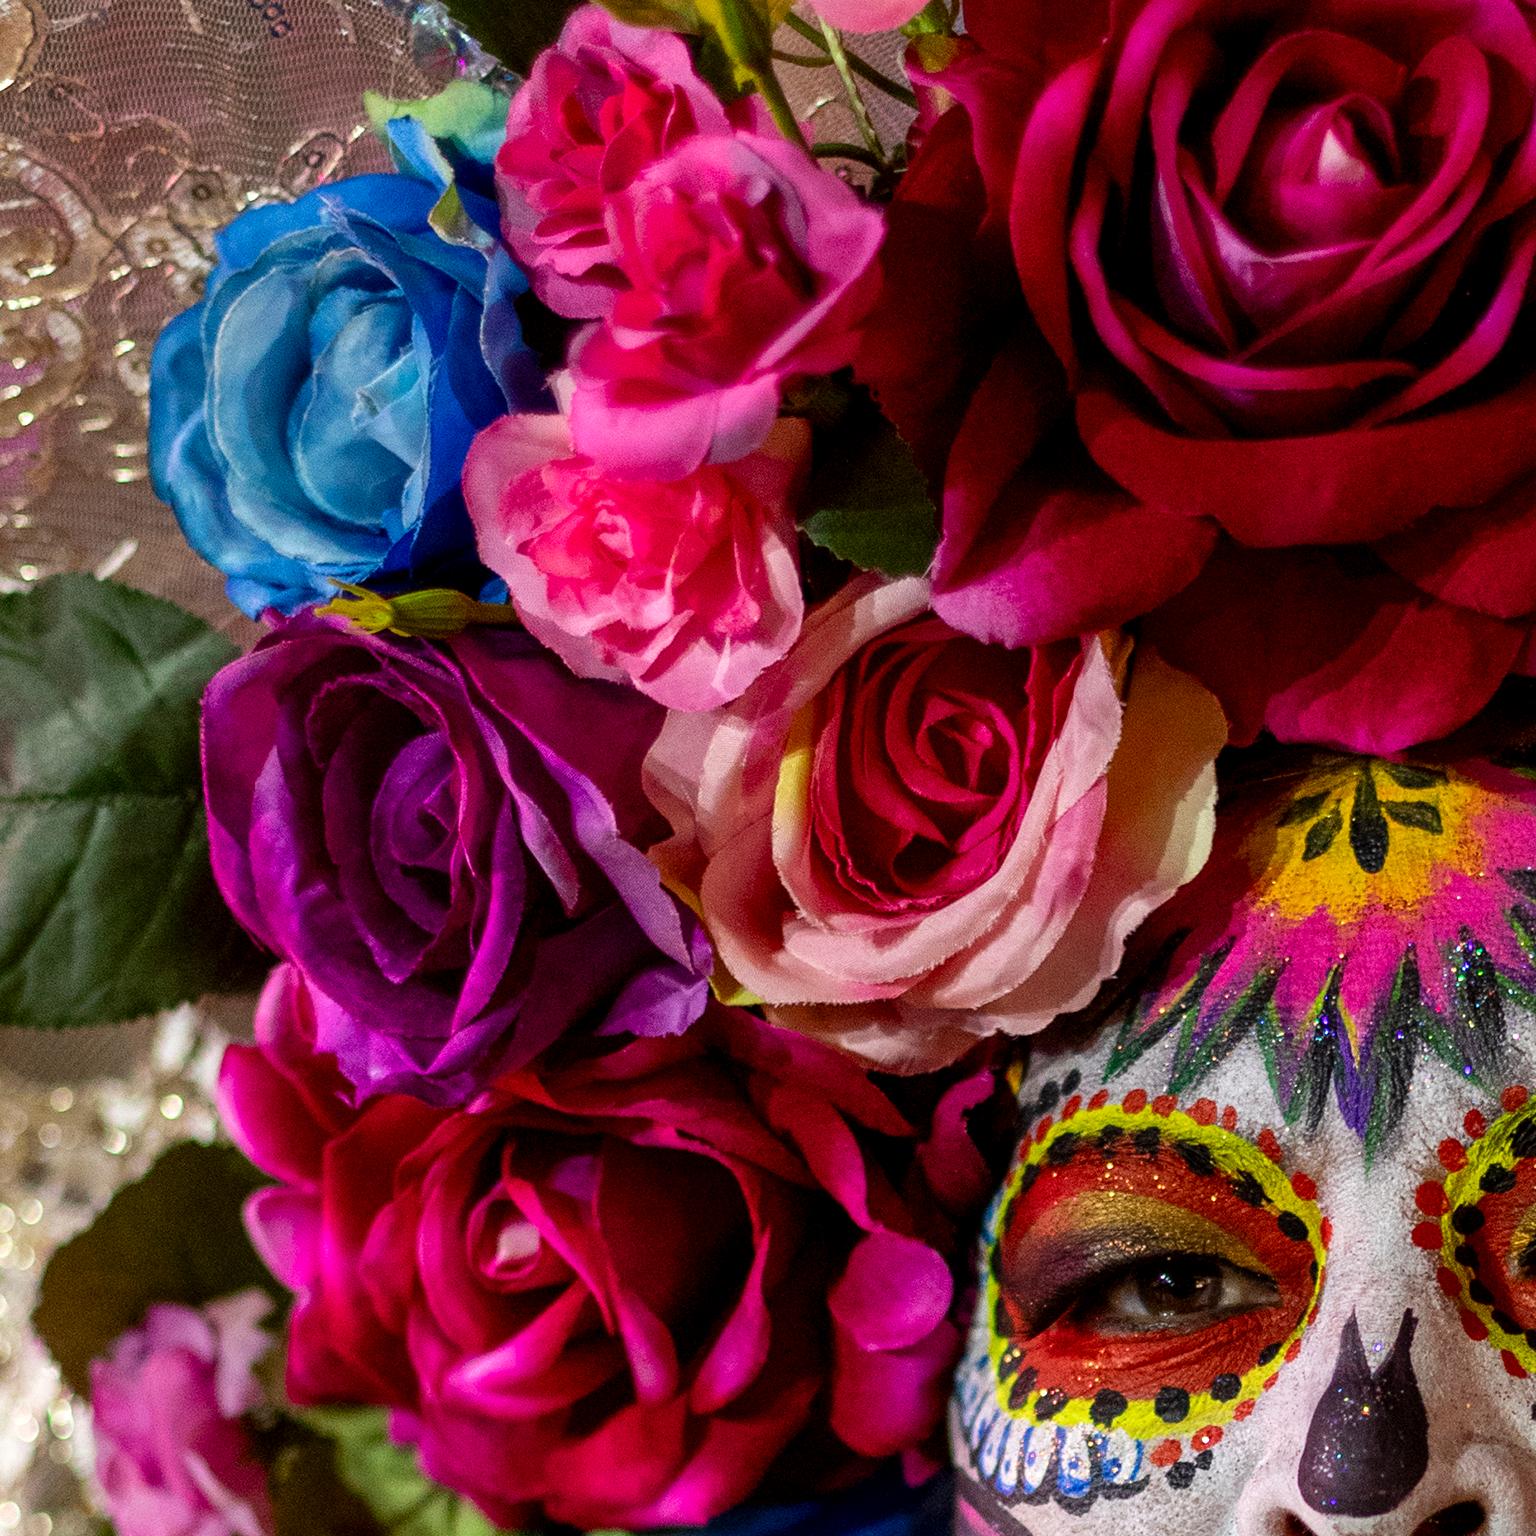 “A crown of roses for death”, Day of the Dead, Dia de los Muertos, Isla Mujeres, Mexico, 2023

Photograph by Cosmo Condina in colour of a woman colourfully dressed as a skeleton, with a crown of roses for the celebration of the Day of the Dead. Isla